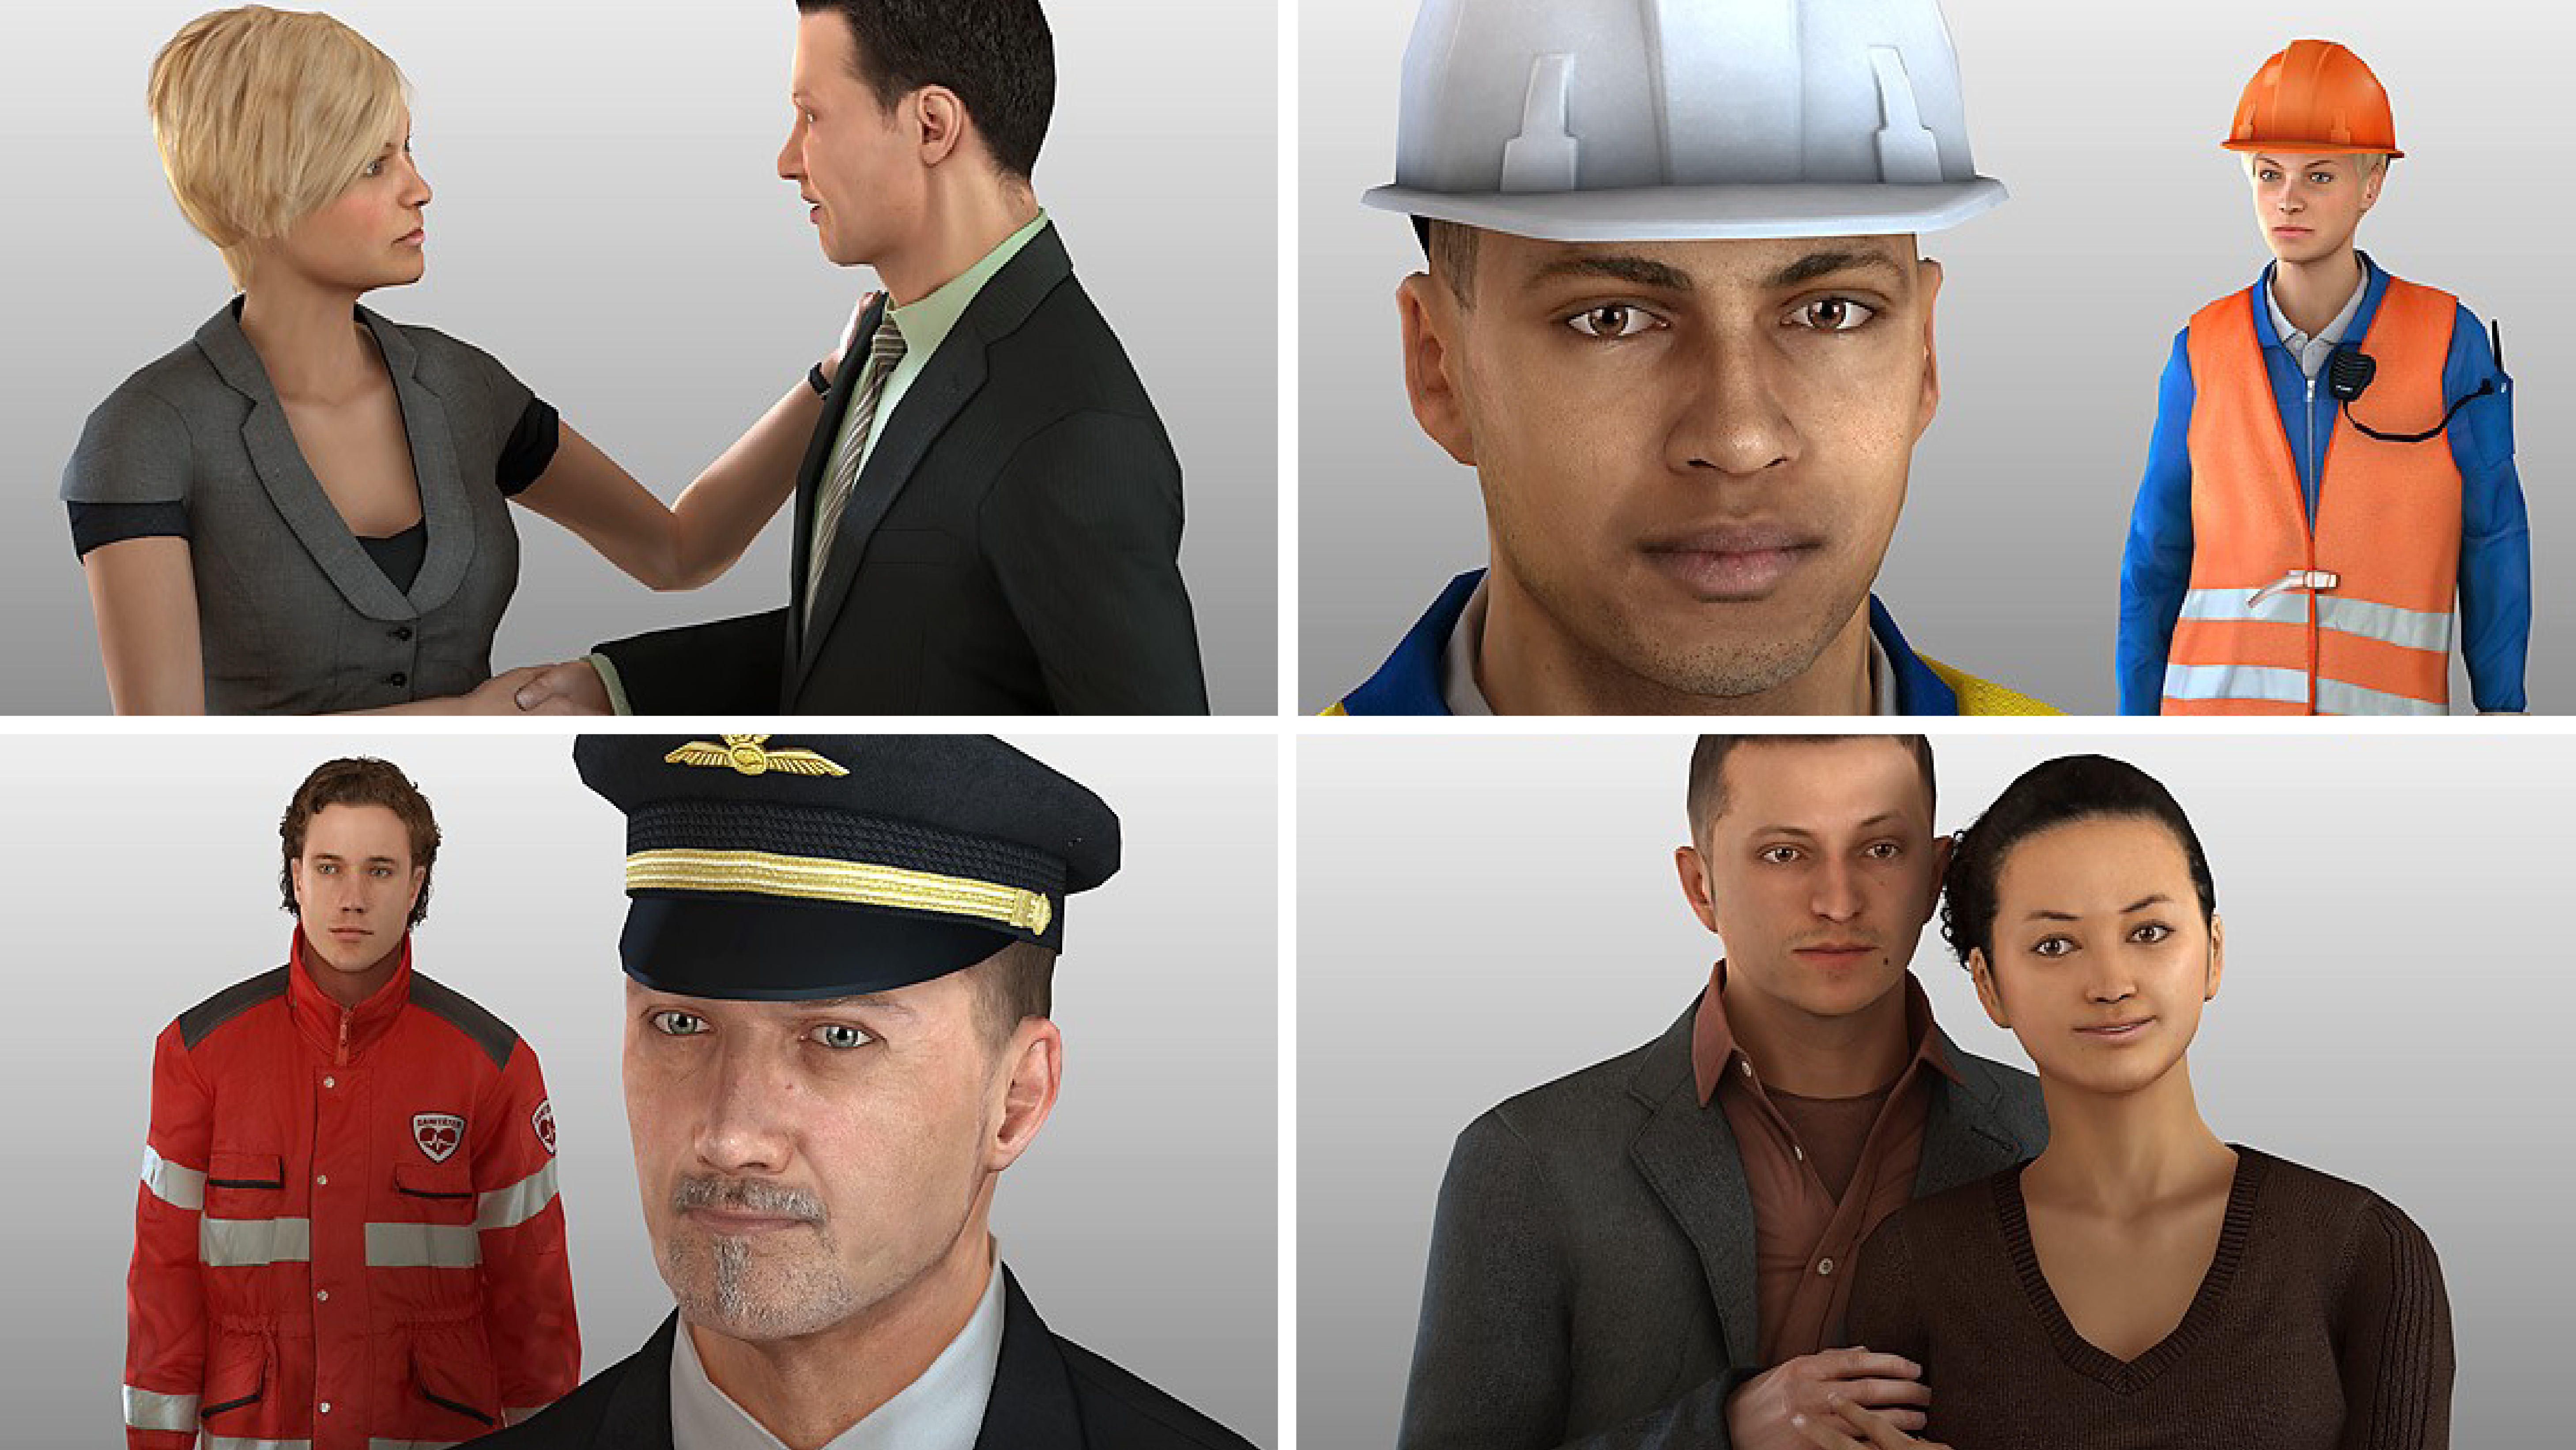 Four sets of examples of Microsoft Rocketbox avatars. On the top left, a female avatar and male avatar professionally dressed shake hands; on the top right, an avatar in the foreground and one in the background, both dressed in attire for construction work, look forward; on the bottom left, an avatar in a pilots uniform is looking ahead in the foreground and an avatar wearing a medics jacket is in the background; on the bottom right, a male avatar stands closely behind a female avatar, his hand resting on her arm and her hand resting on his hand.